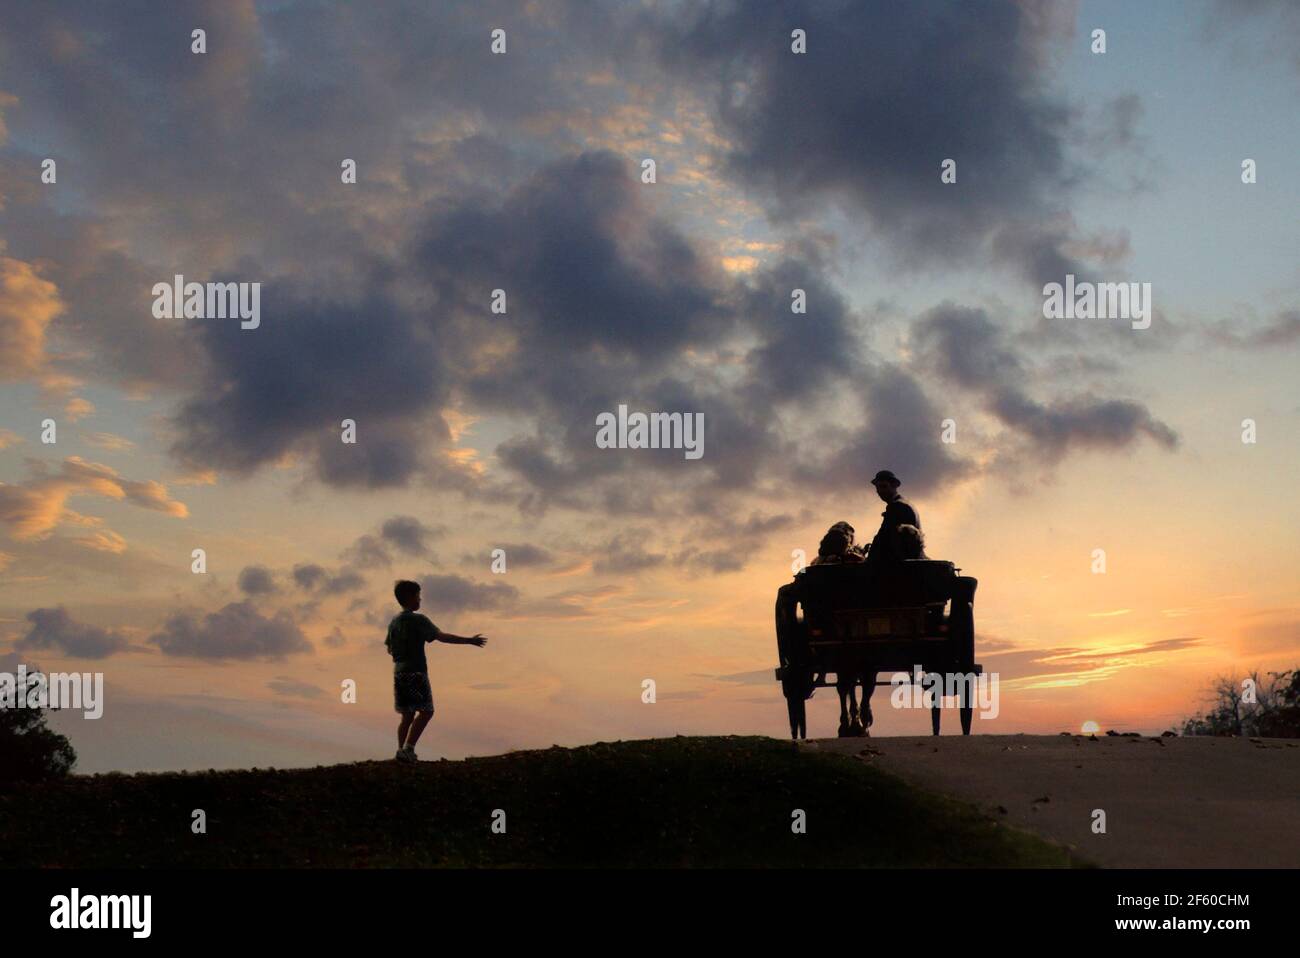 Historical archival 1989 silhouette view of people riding in 80s pony and trap on sunset skyline at brow of incline on the Long Walk in Windsor Great Park with cheeky young boy seemingly thumbing a lift in this1980s archival image in the Royal Park Berkshire England UK Stock Photo